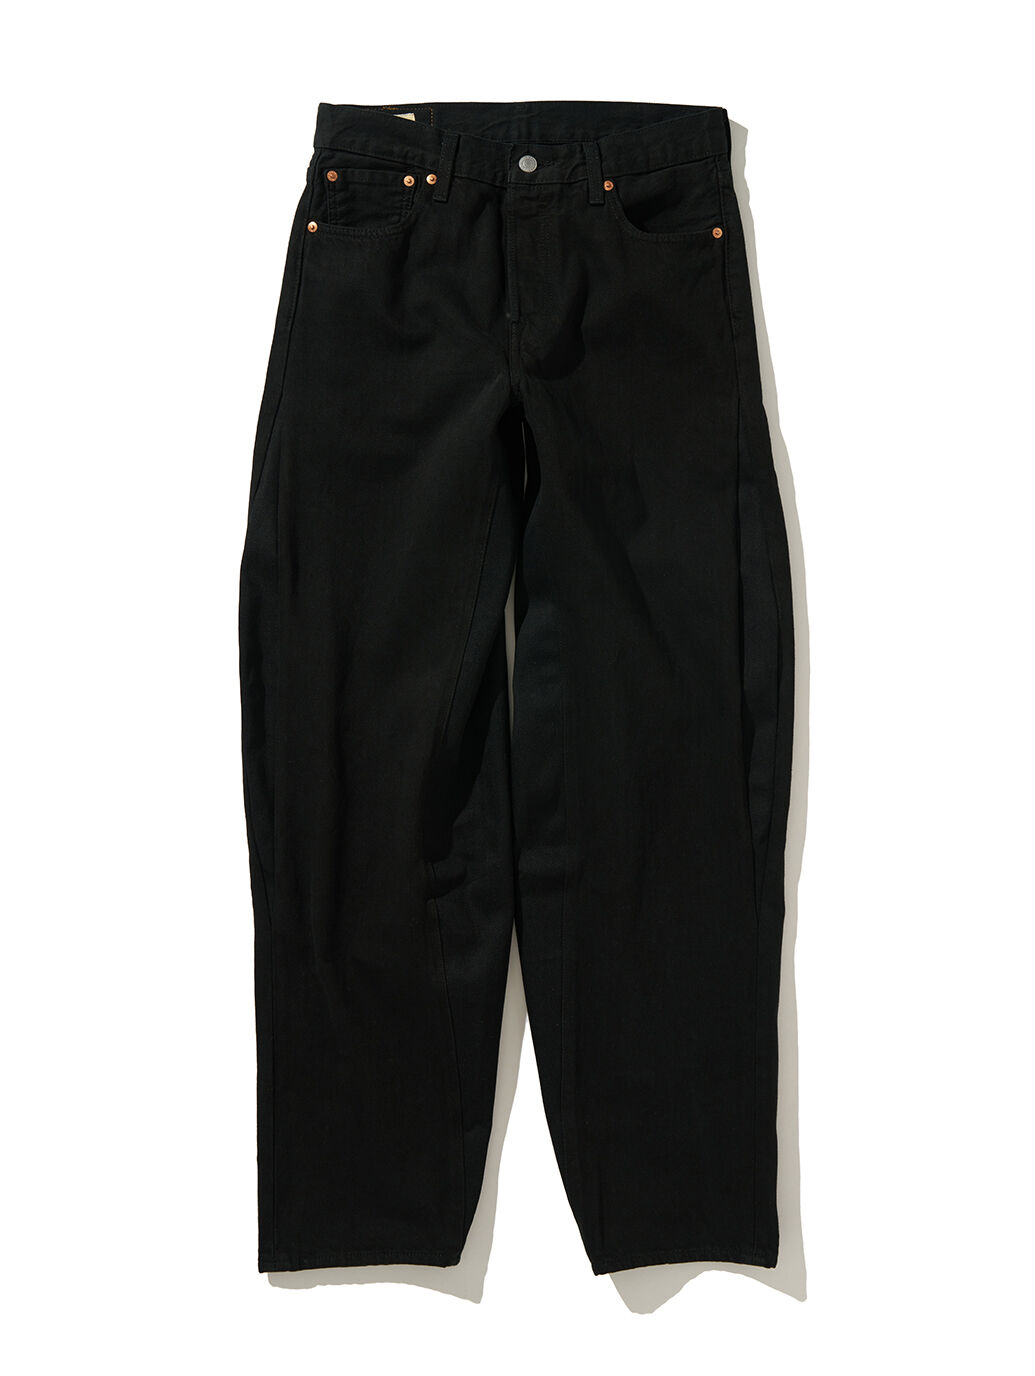 501® CUSTOMIZED EXPANSION JEANS V2 S/D BLACK｜リーバイス® 公式通販